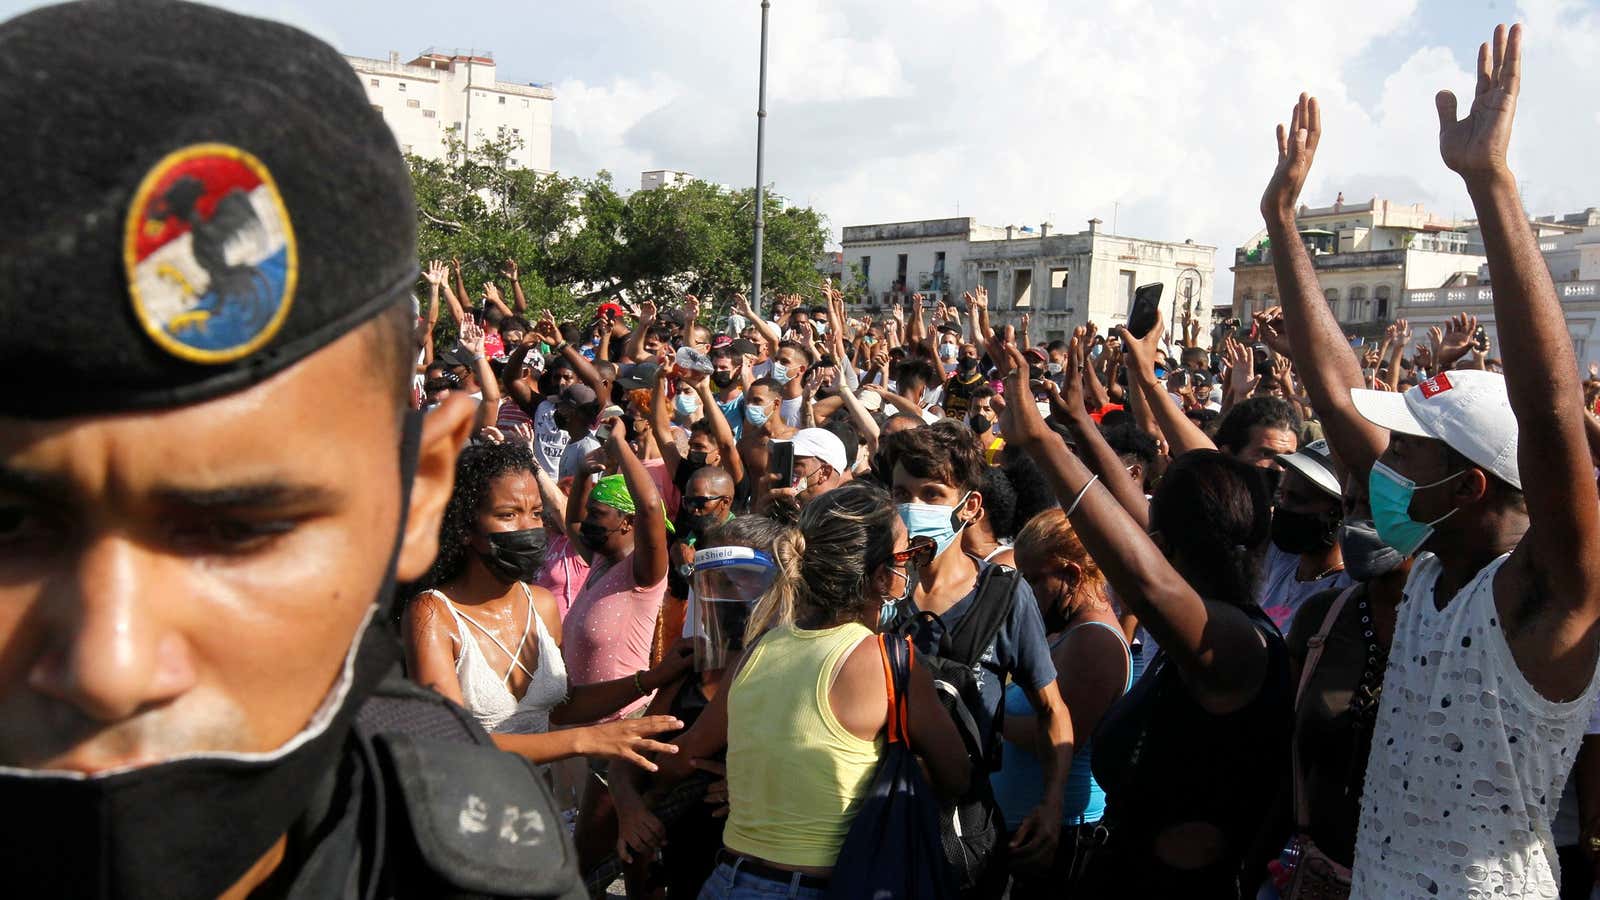 The Cuban government called in its “black berets” special forces units to quell protests.